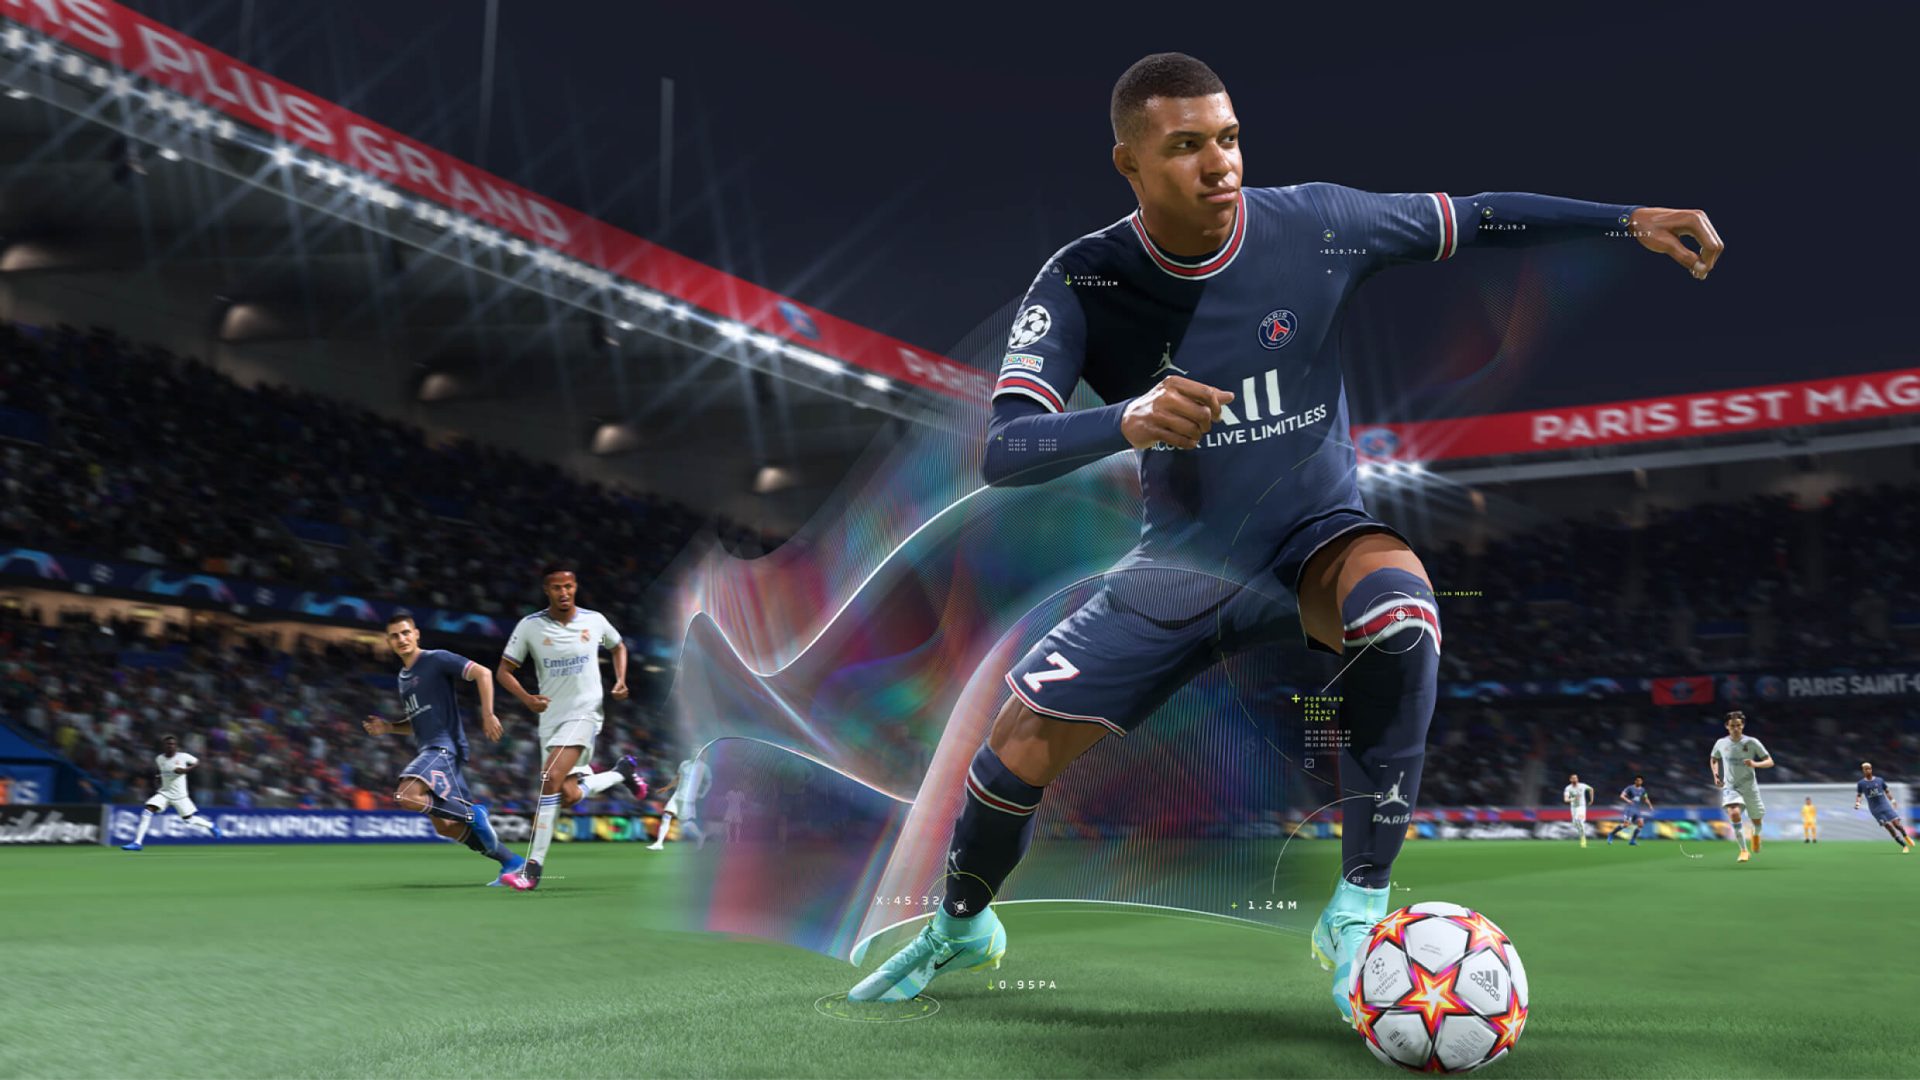 EA's FIFA Series Delisted On All Digital Storefronts Including